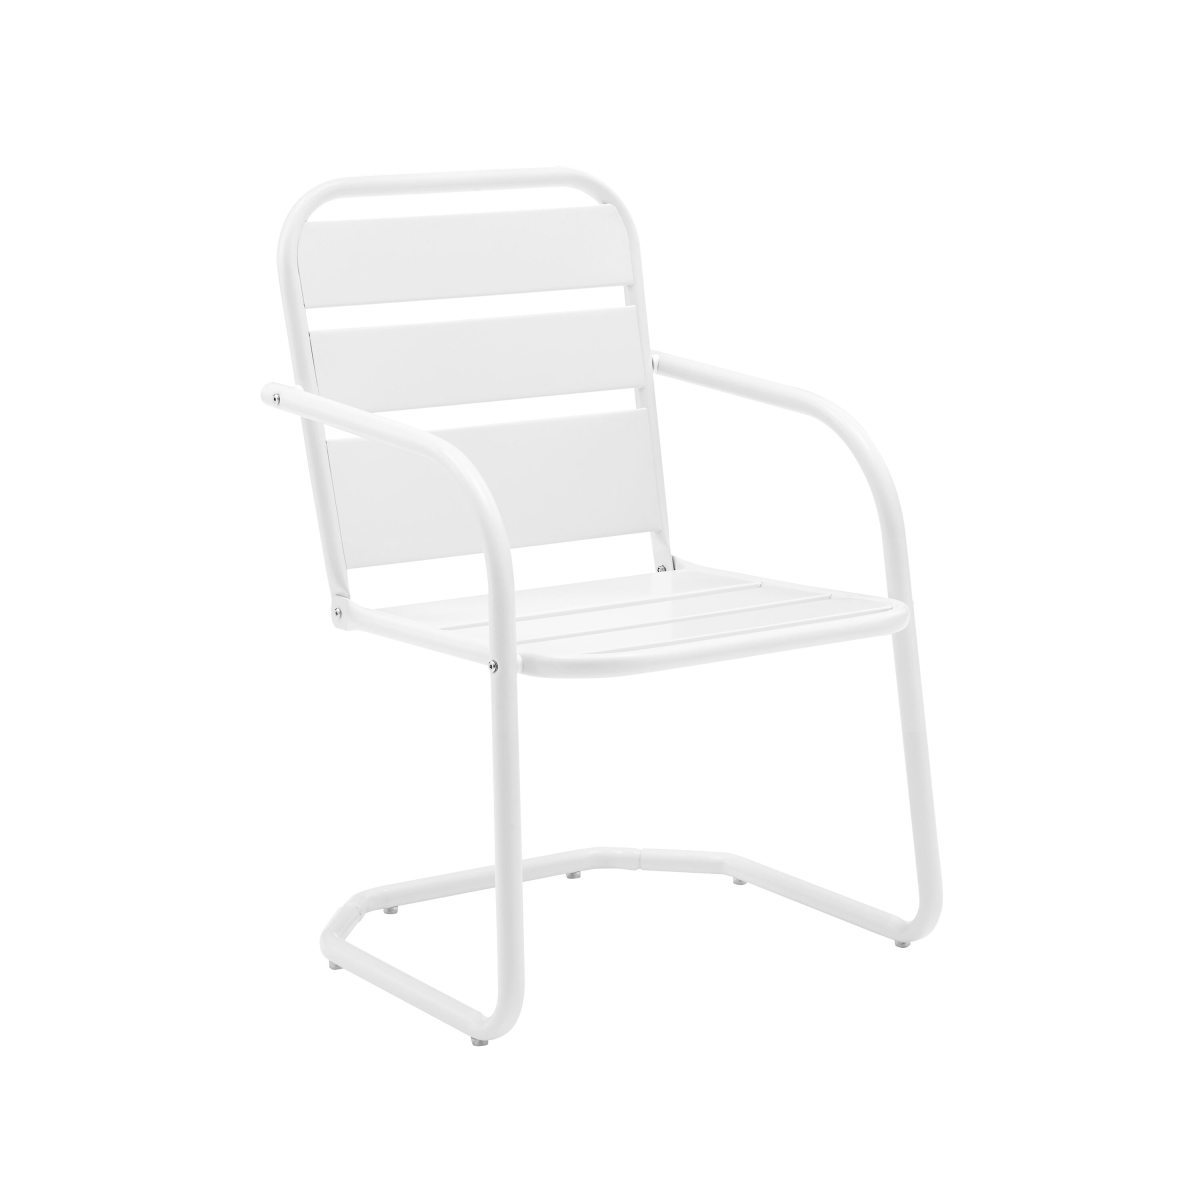 Picture of Crosley Furniture CO1030-WH Brighton Metal Chair, White Gloss - Set of 2, 22.88 x 23.63 x 33.25 in.